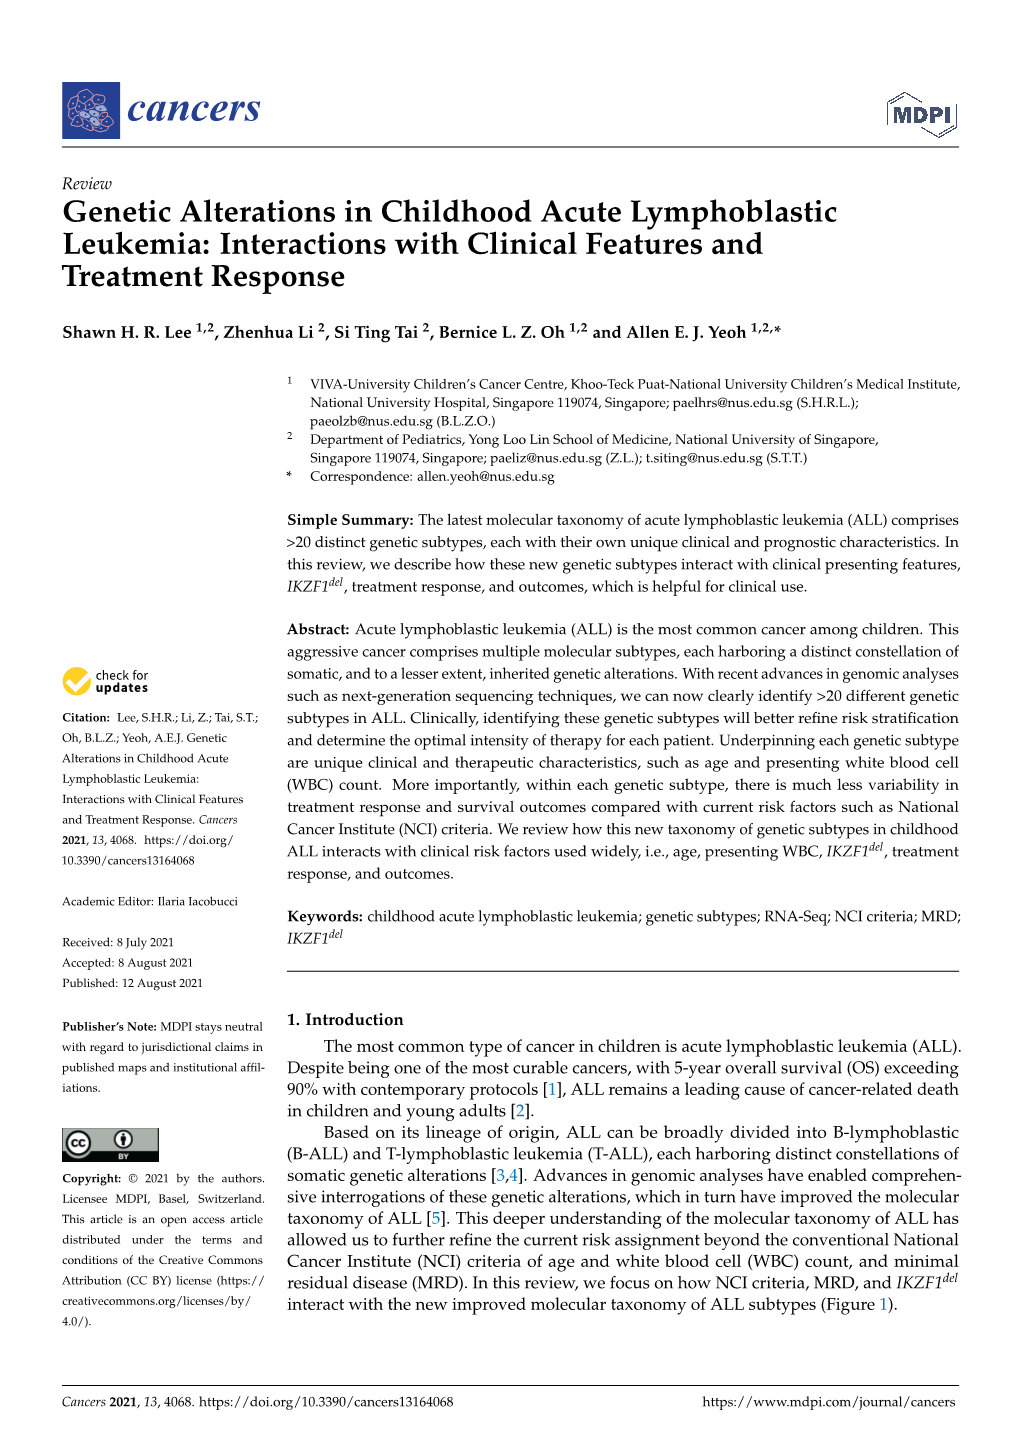 Genetic Alterations in Childhood Acute Lymphoblastic Leukemia: Interactions with Clinical Features and Treatment Response